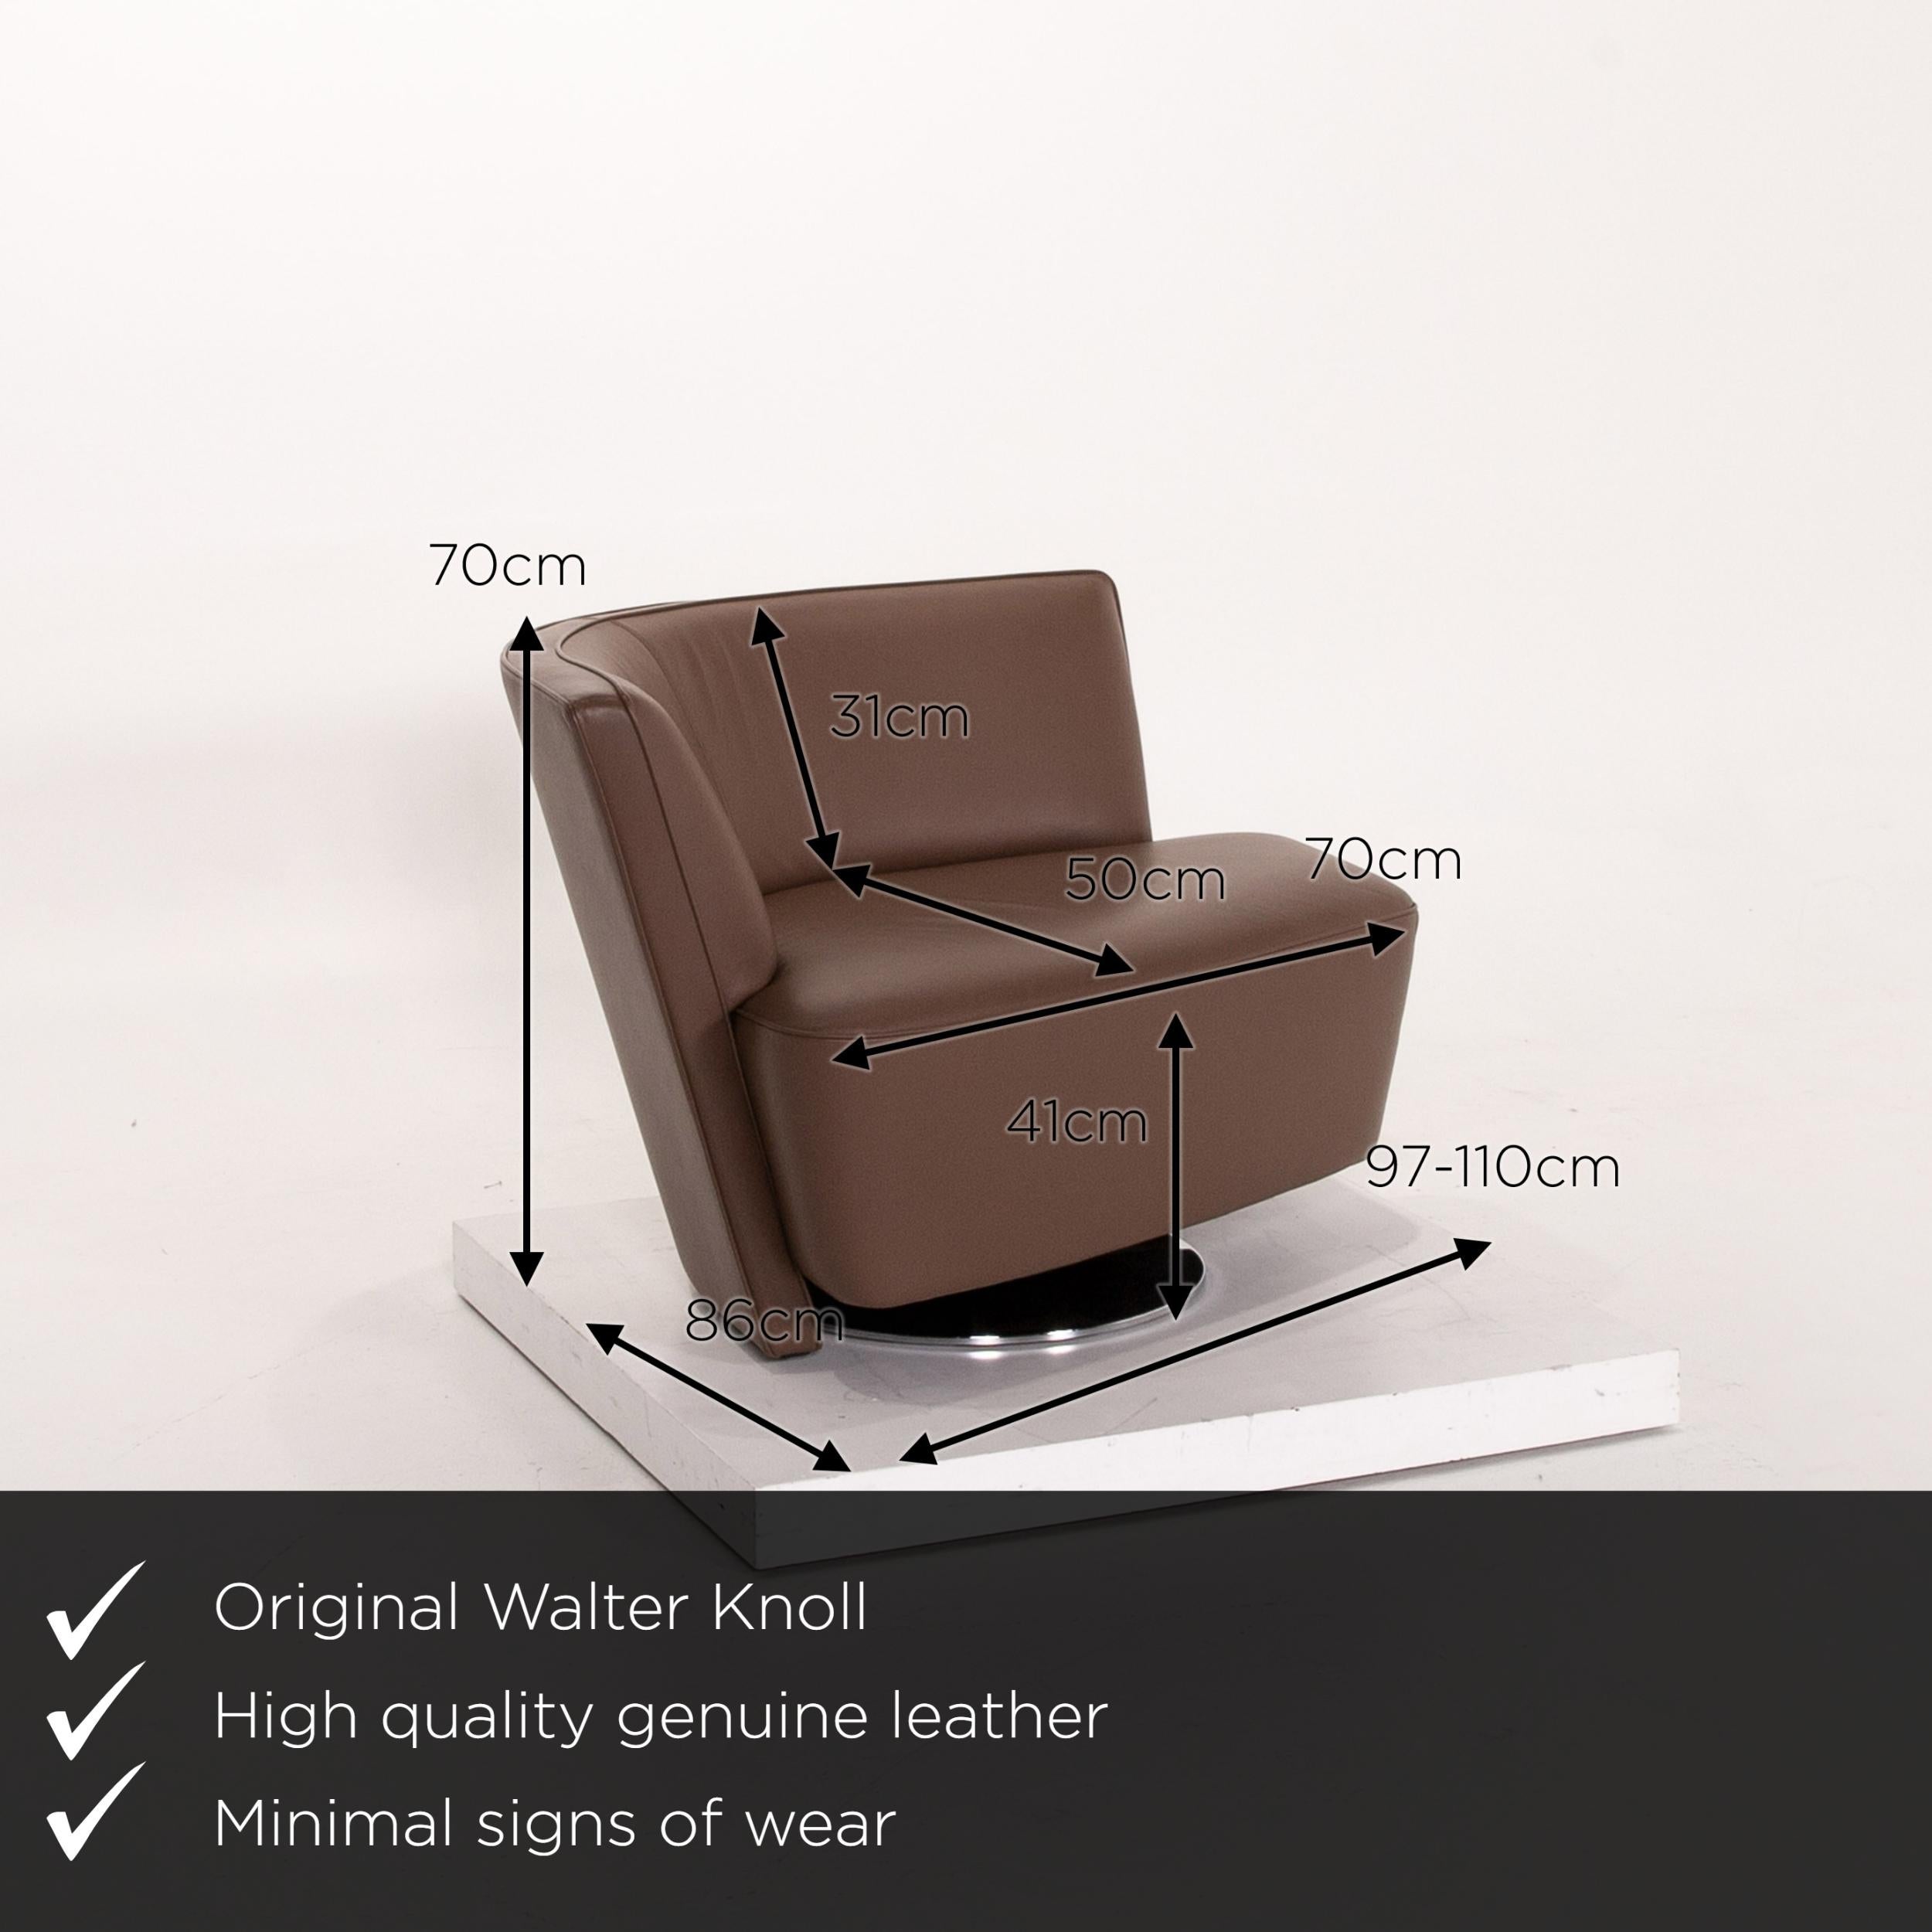 We present to you a Walter Knoll Drift leather armchair brown.
 

 Product measurements in centimeters:
 

Depth 86
Width 97
Height 70
Seat height 41
Rest height 30
Seat depth 50
Seat width 70
Back height 31.
 